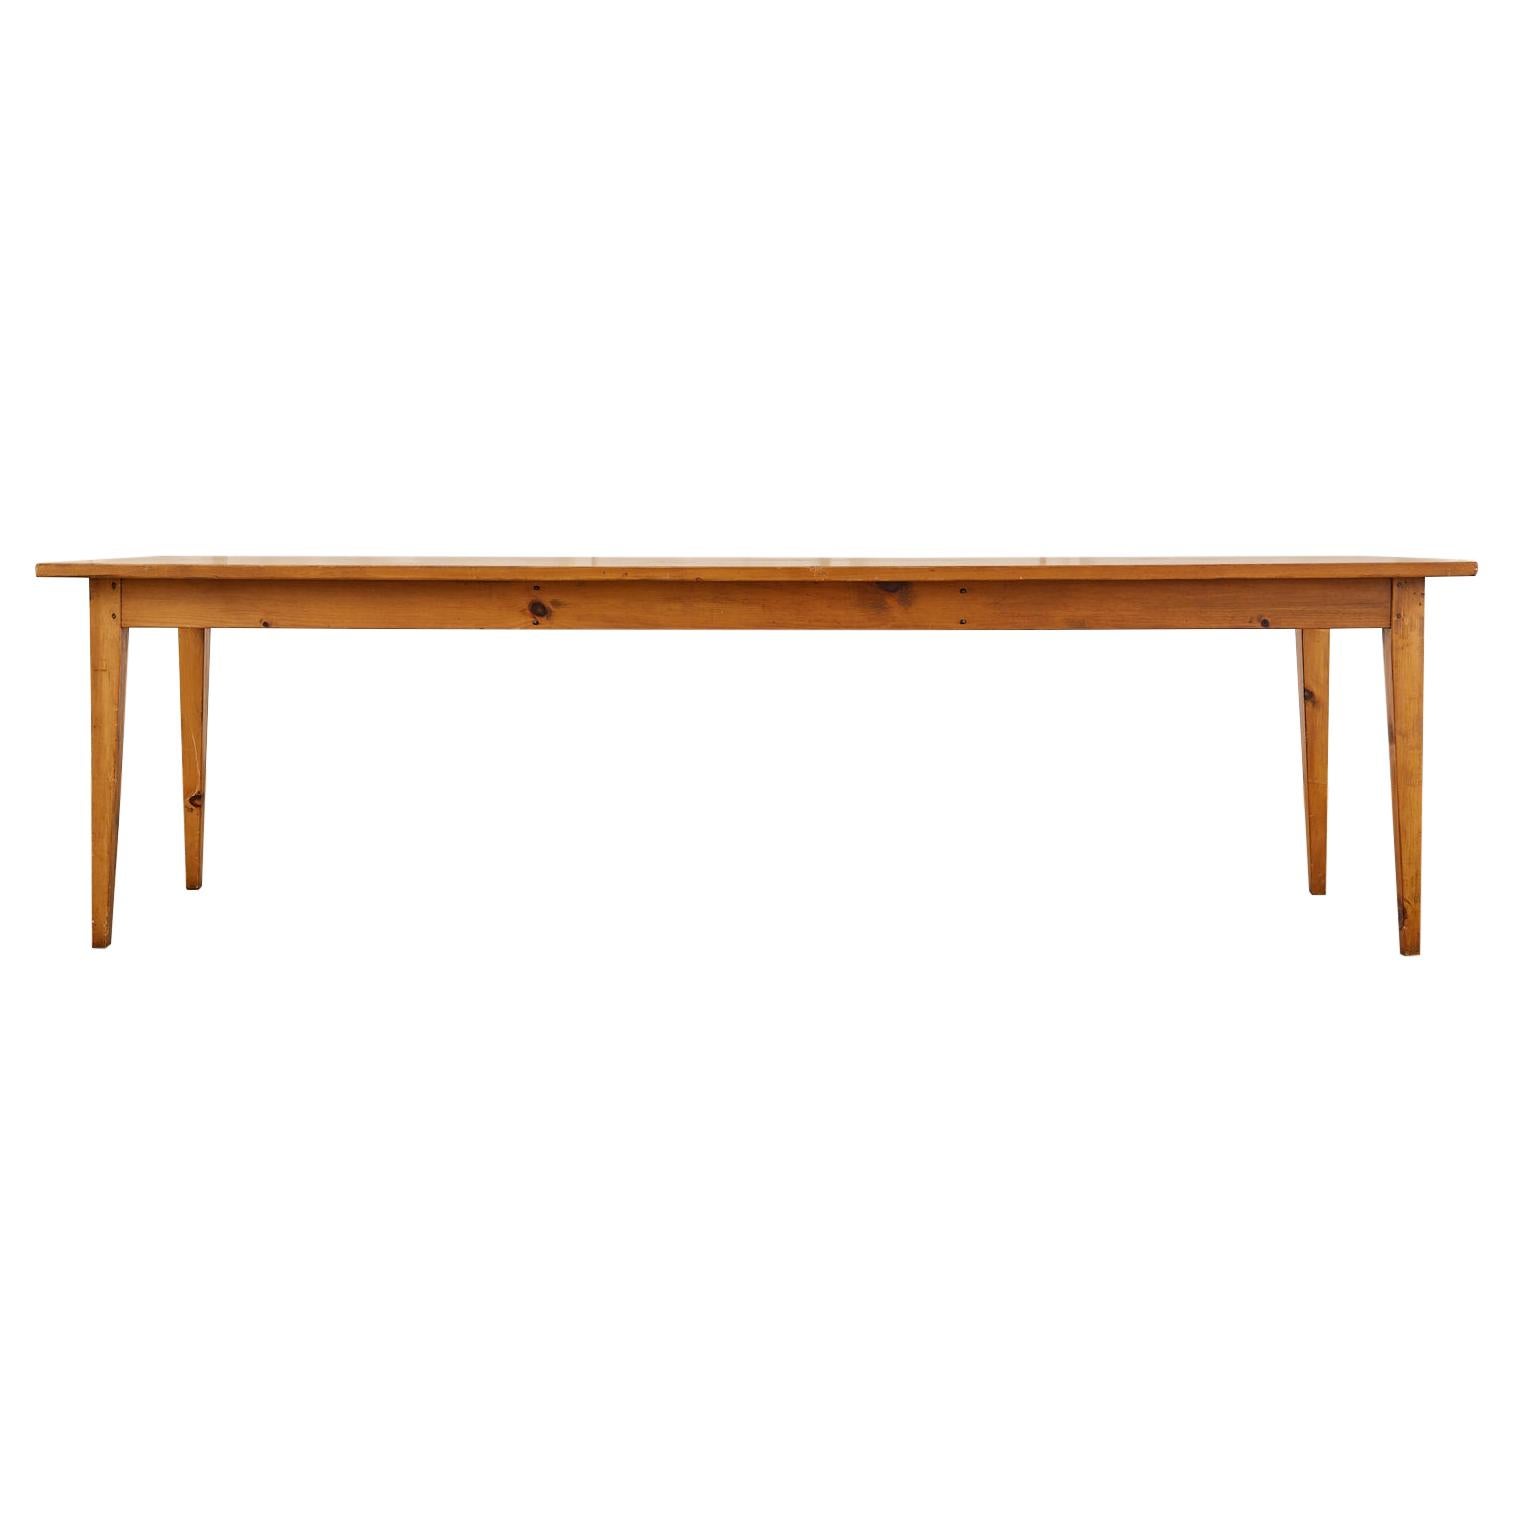 Country English Provincial Farmhouse Dining Table 